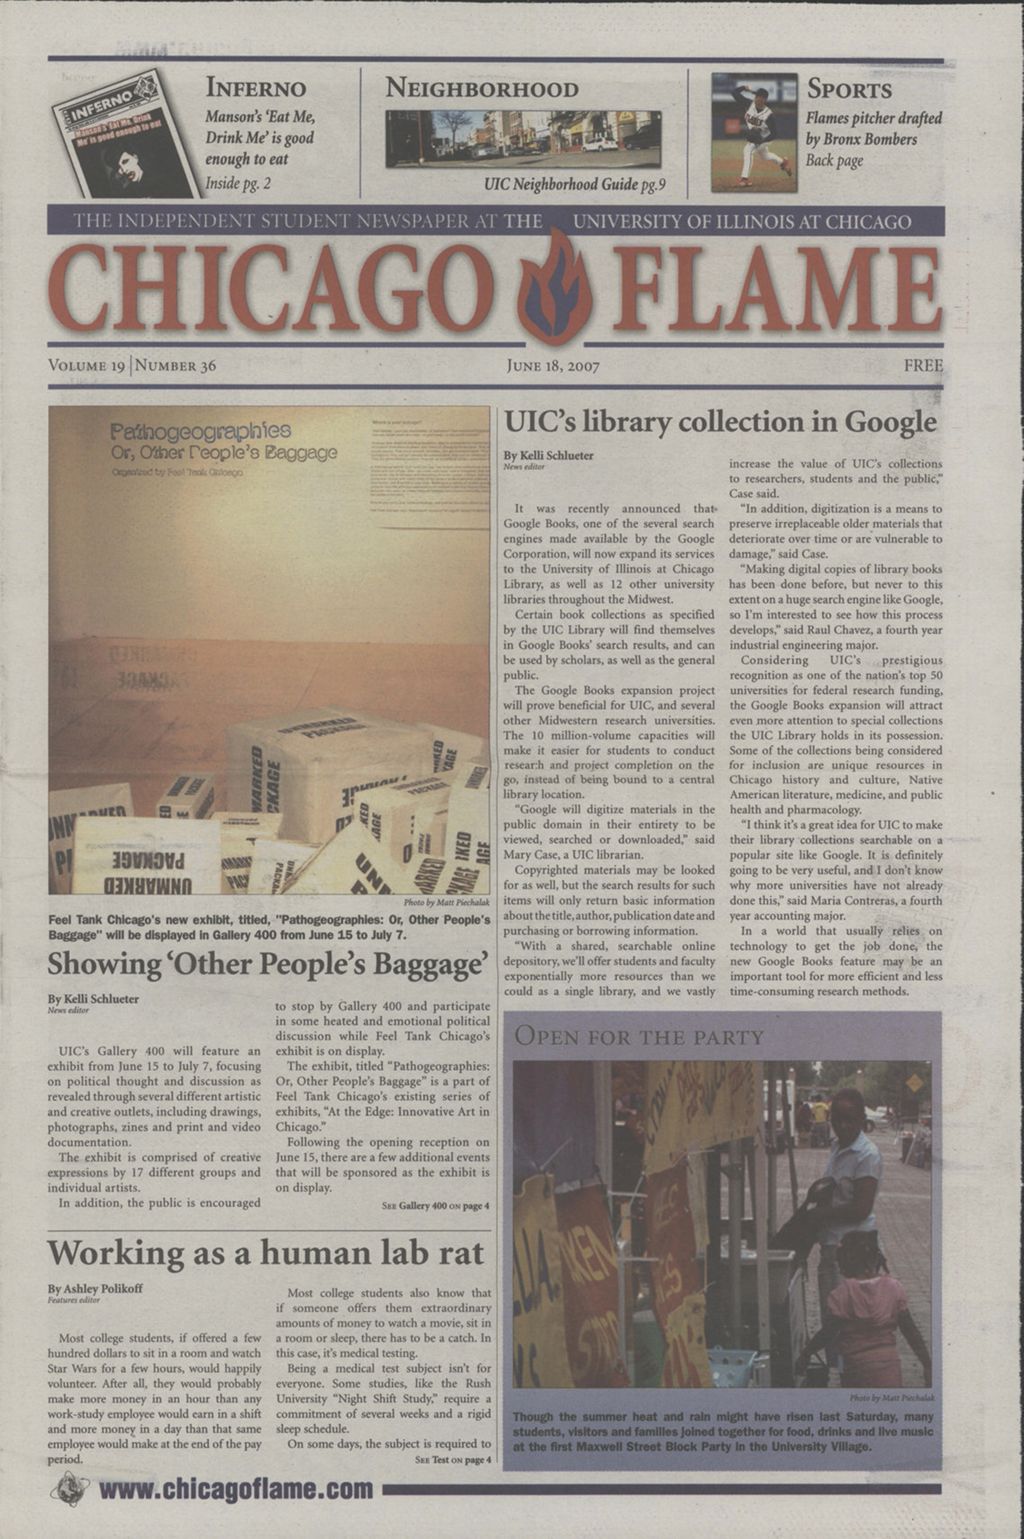 Miniature of Chicago Flame (June 18, 2007)